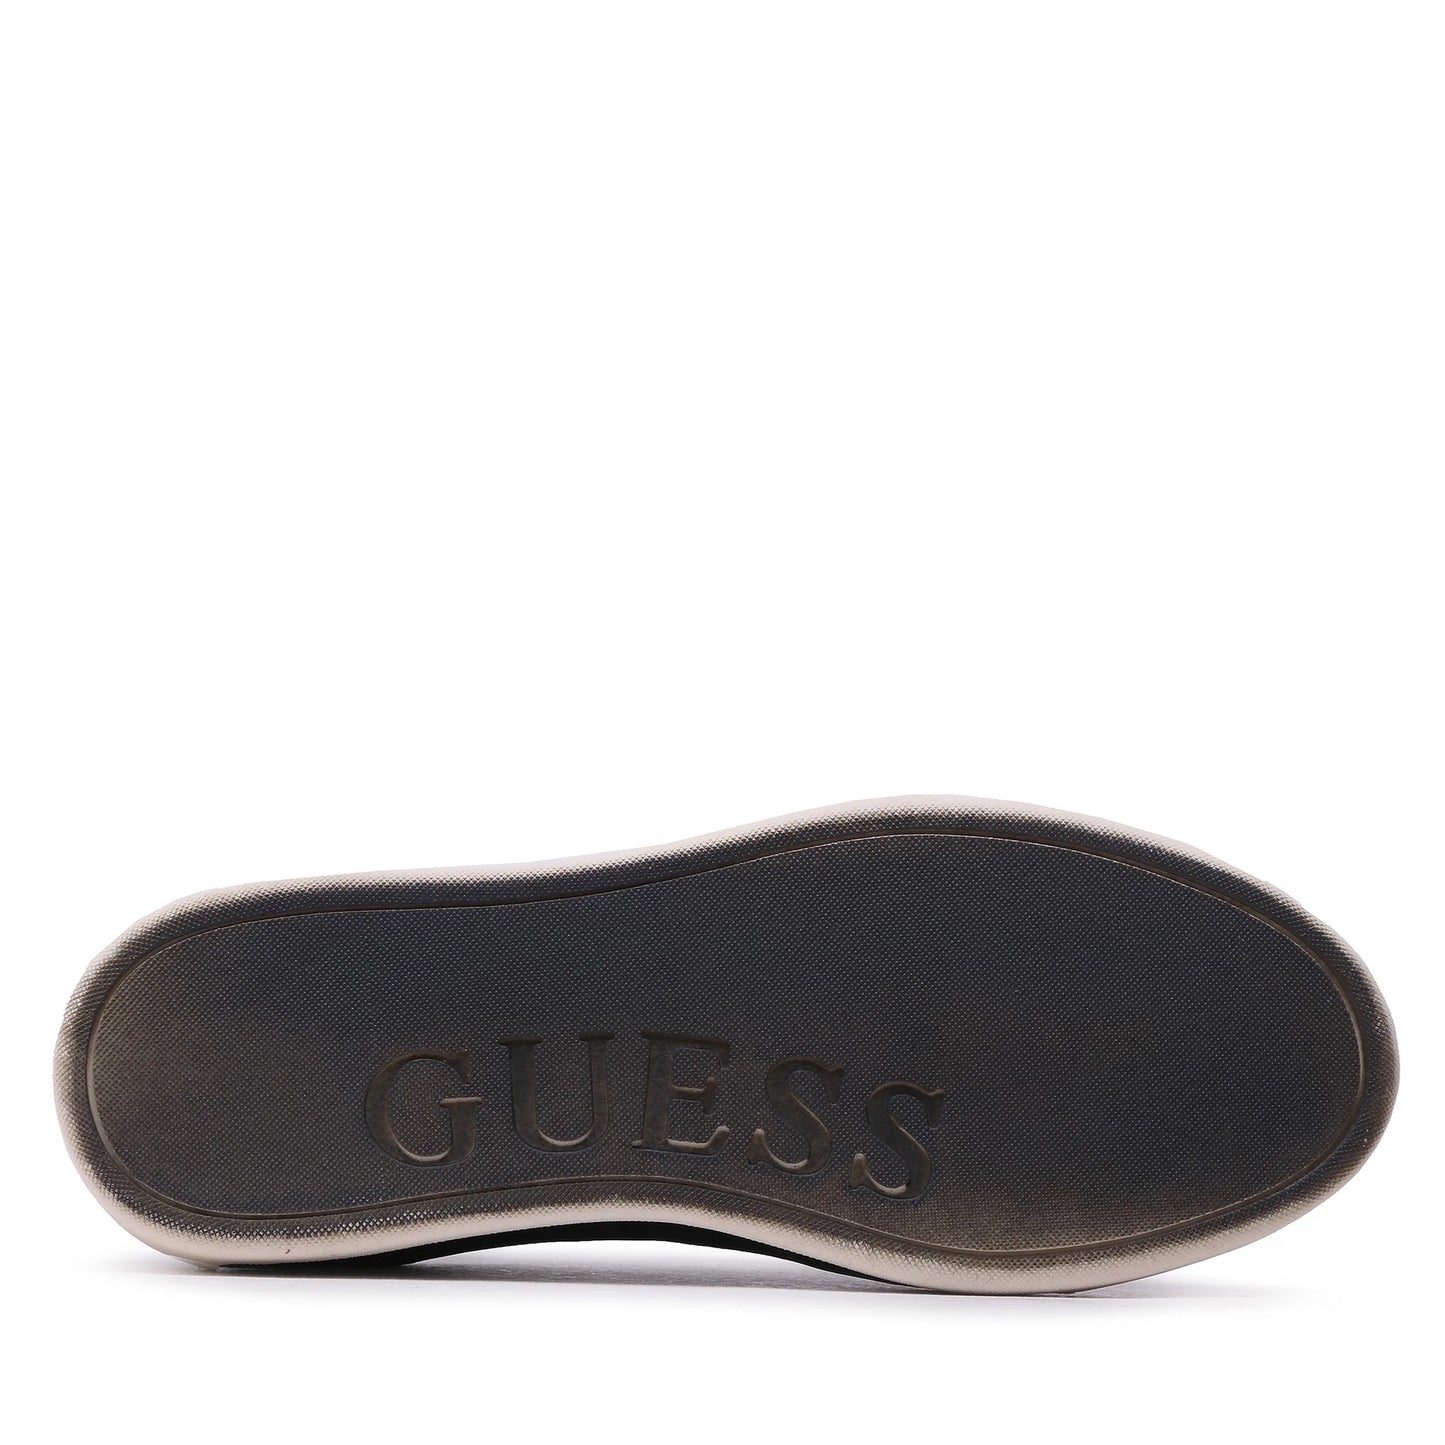 Guess Sneakers Strave Vintage - COAL